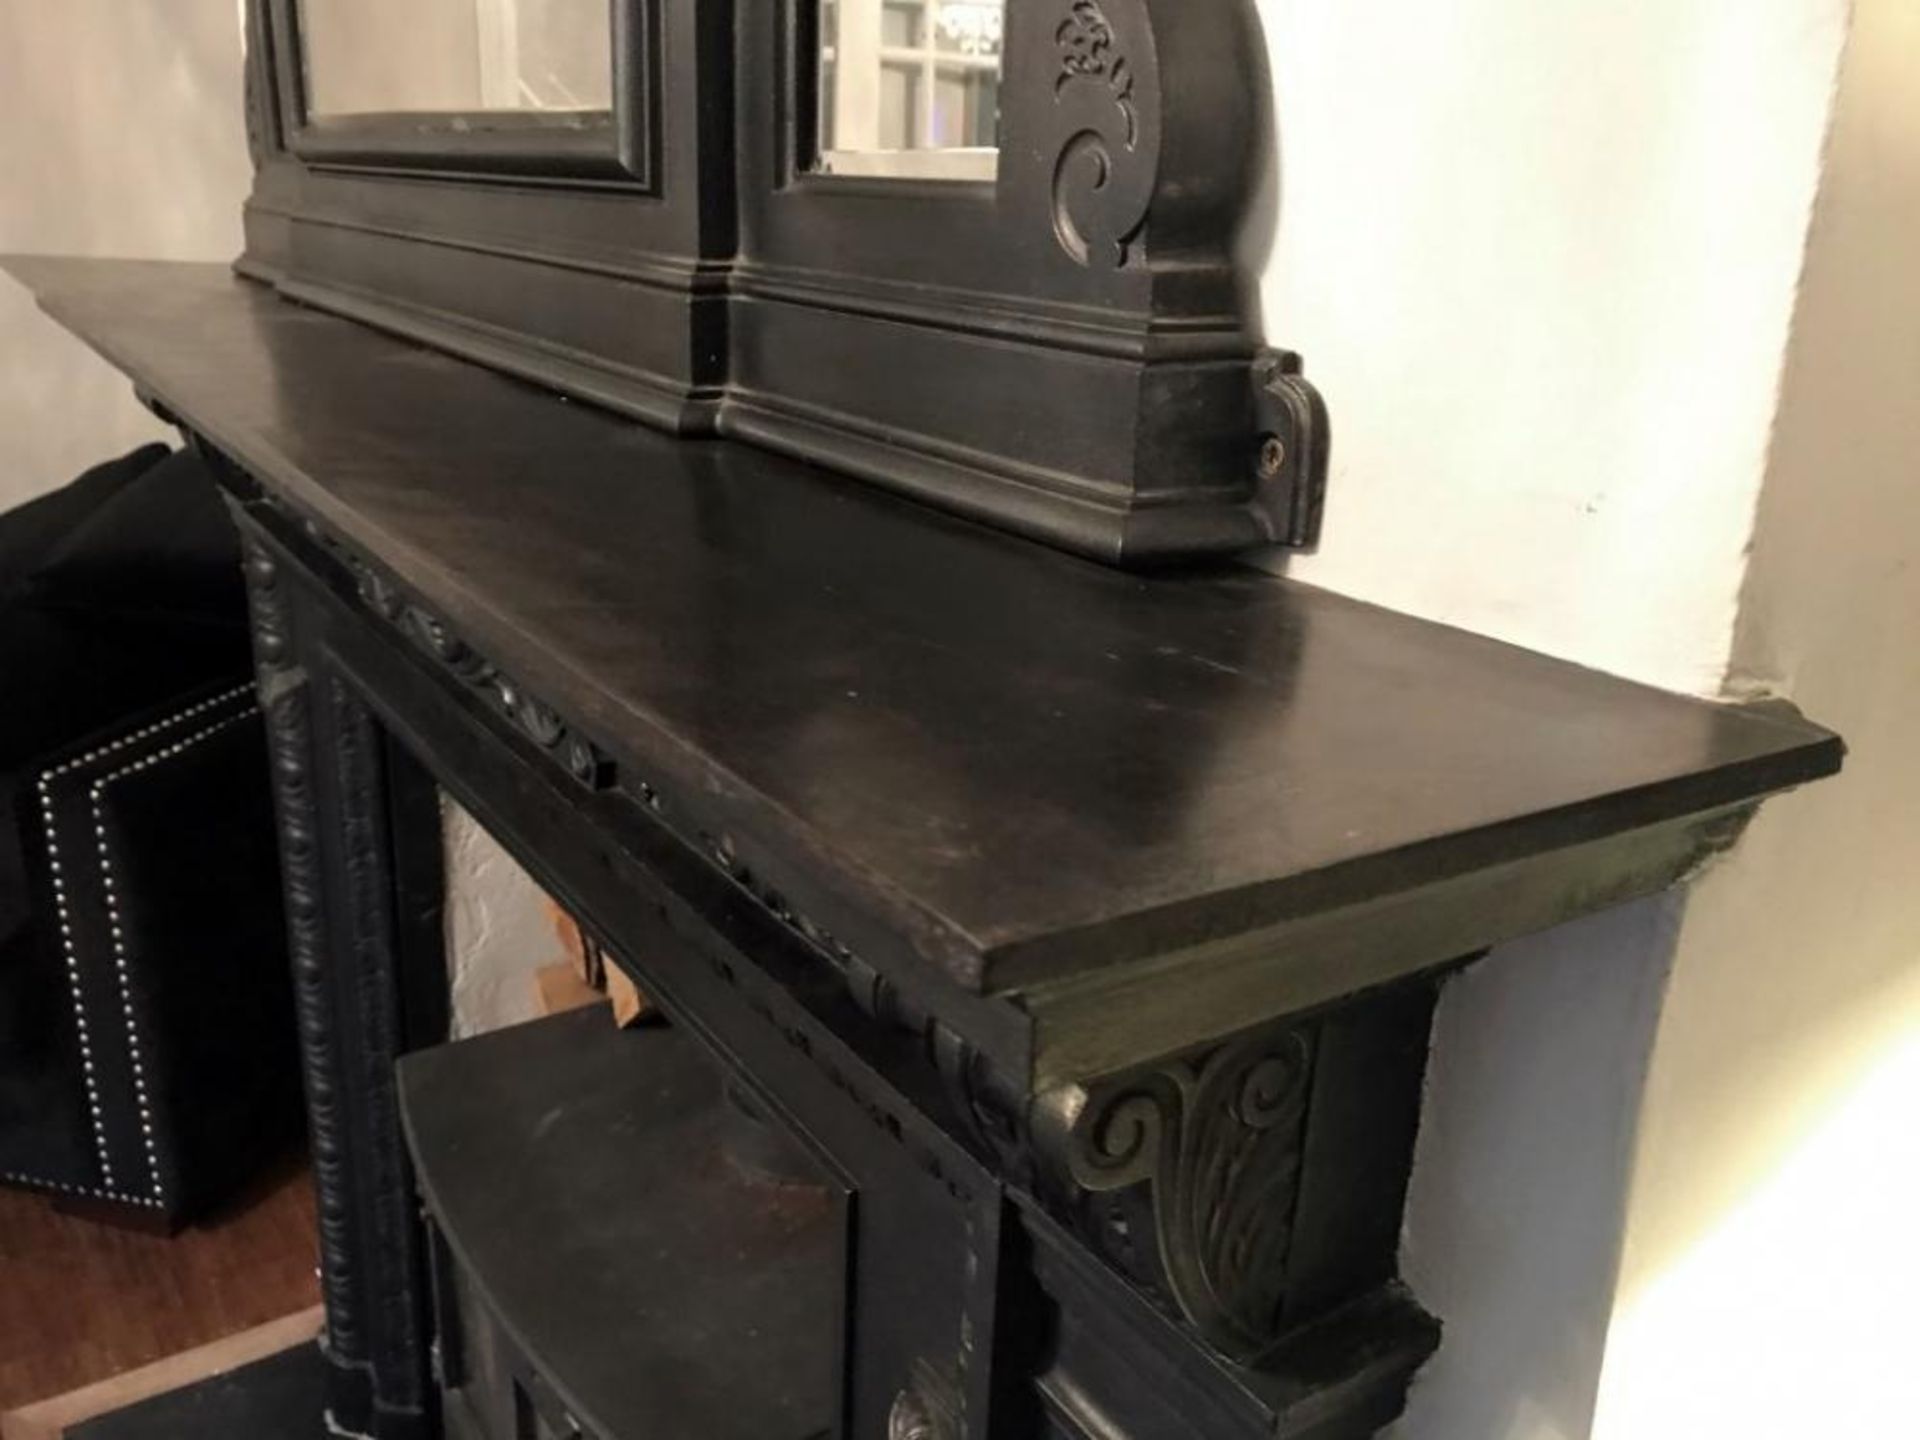 1 x Ultra Rare Stunningly Ornate Antique Victorian Cast Iron Fireplace, With Matching Cast Iron Mirr - Image 6 of 23